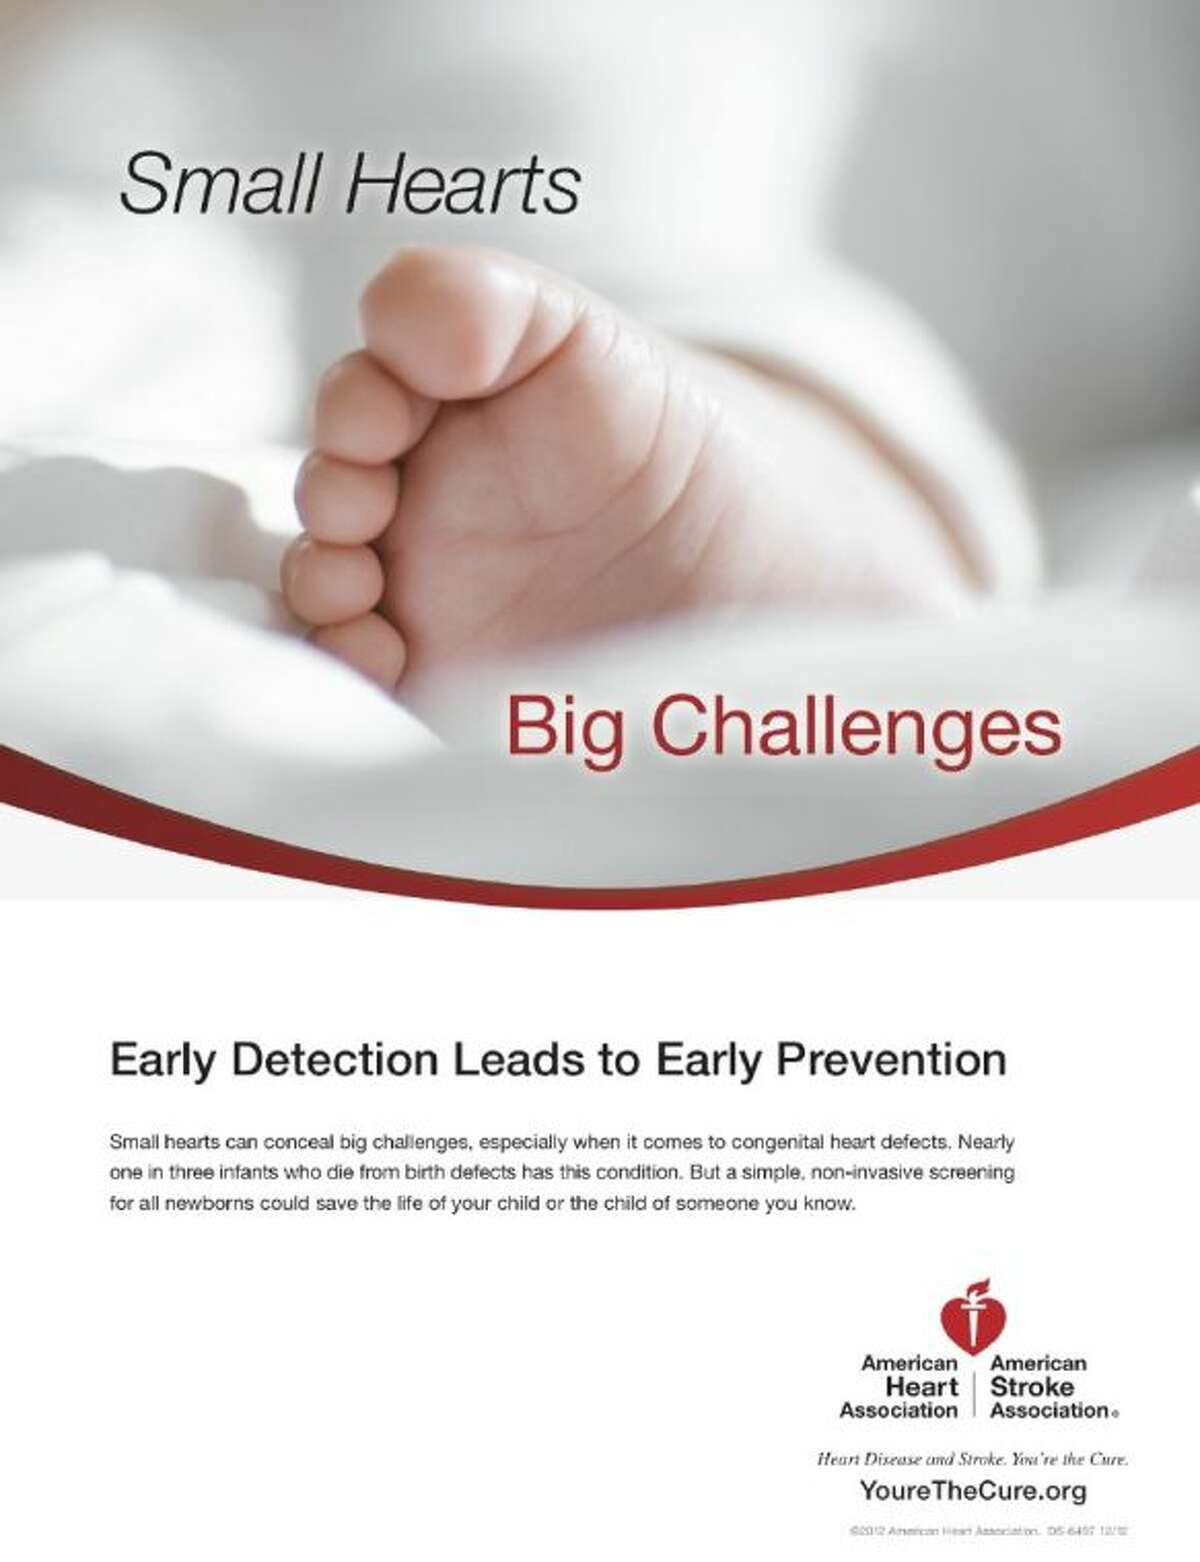 Congenital heart defects are currently the No. 1 killer of infants with birth defects. Pulse Oximetry is a non-invasive test that involves a small probe being attached to an infant’s toe that estimates the percentage of hemoglobin in blood that is saturated with oxygen.